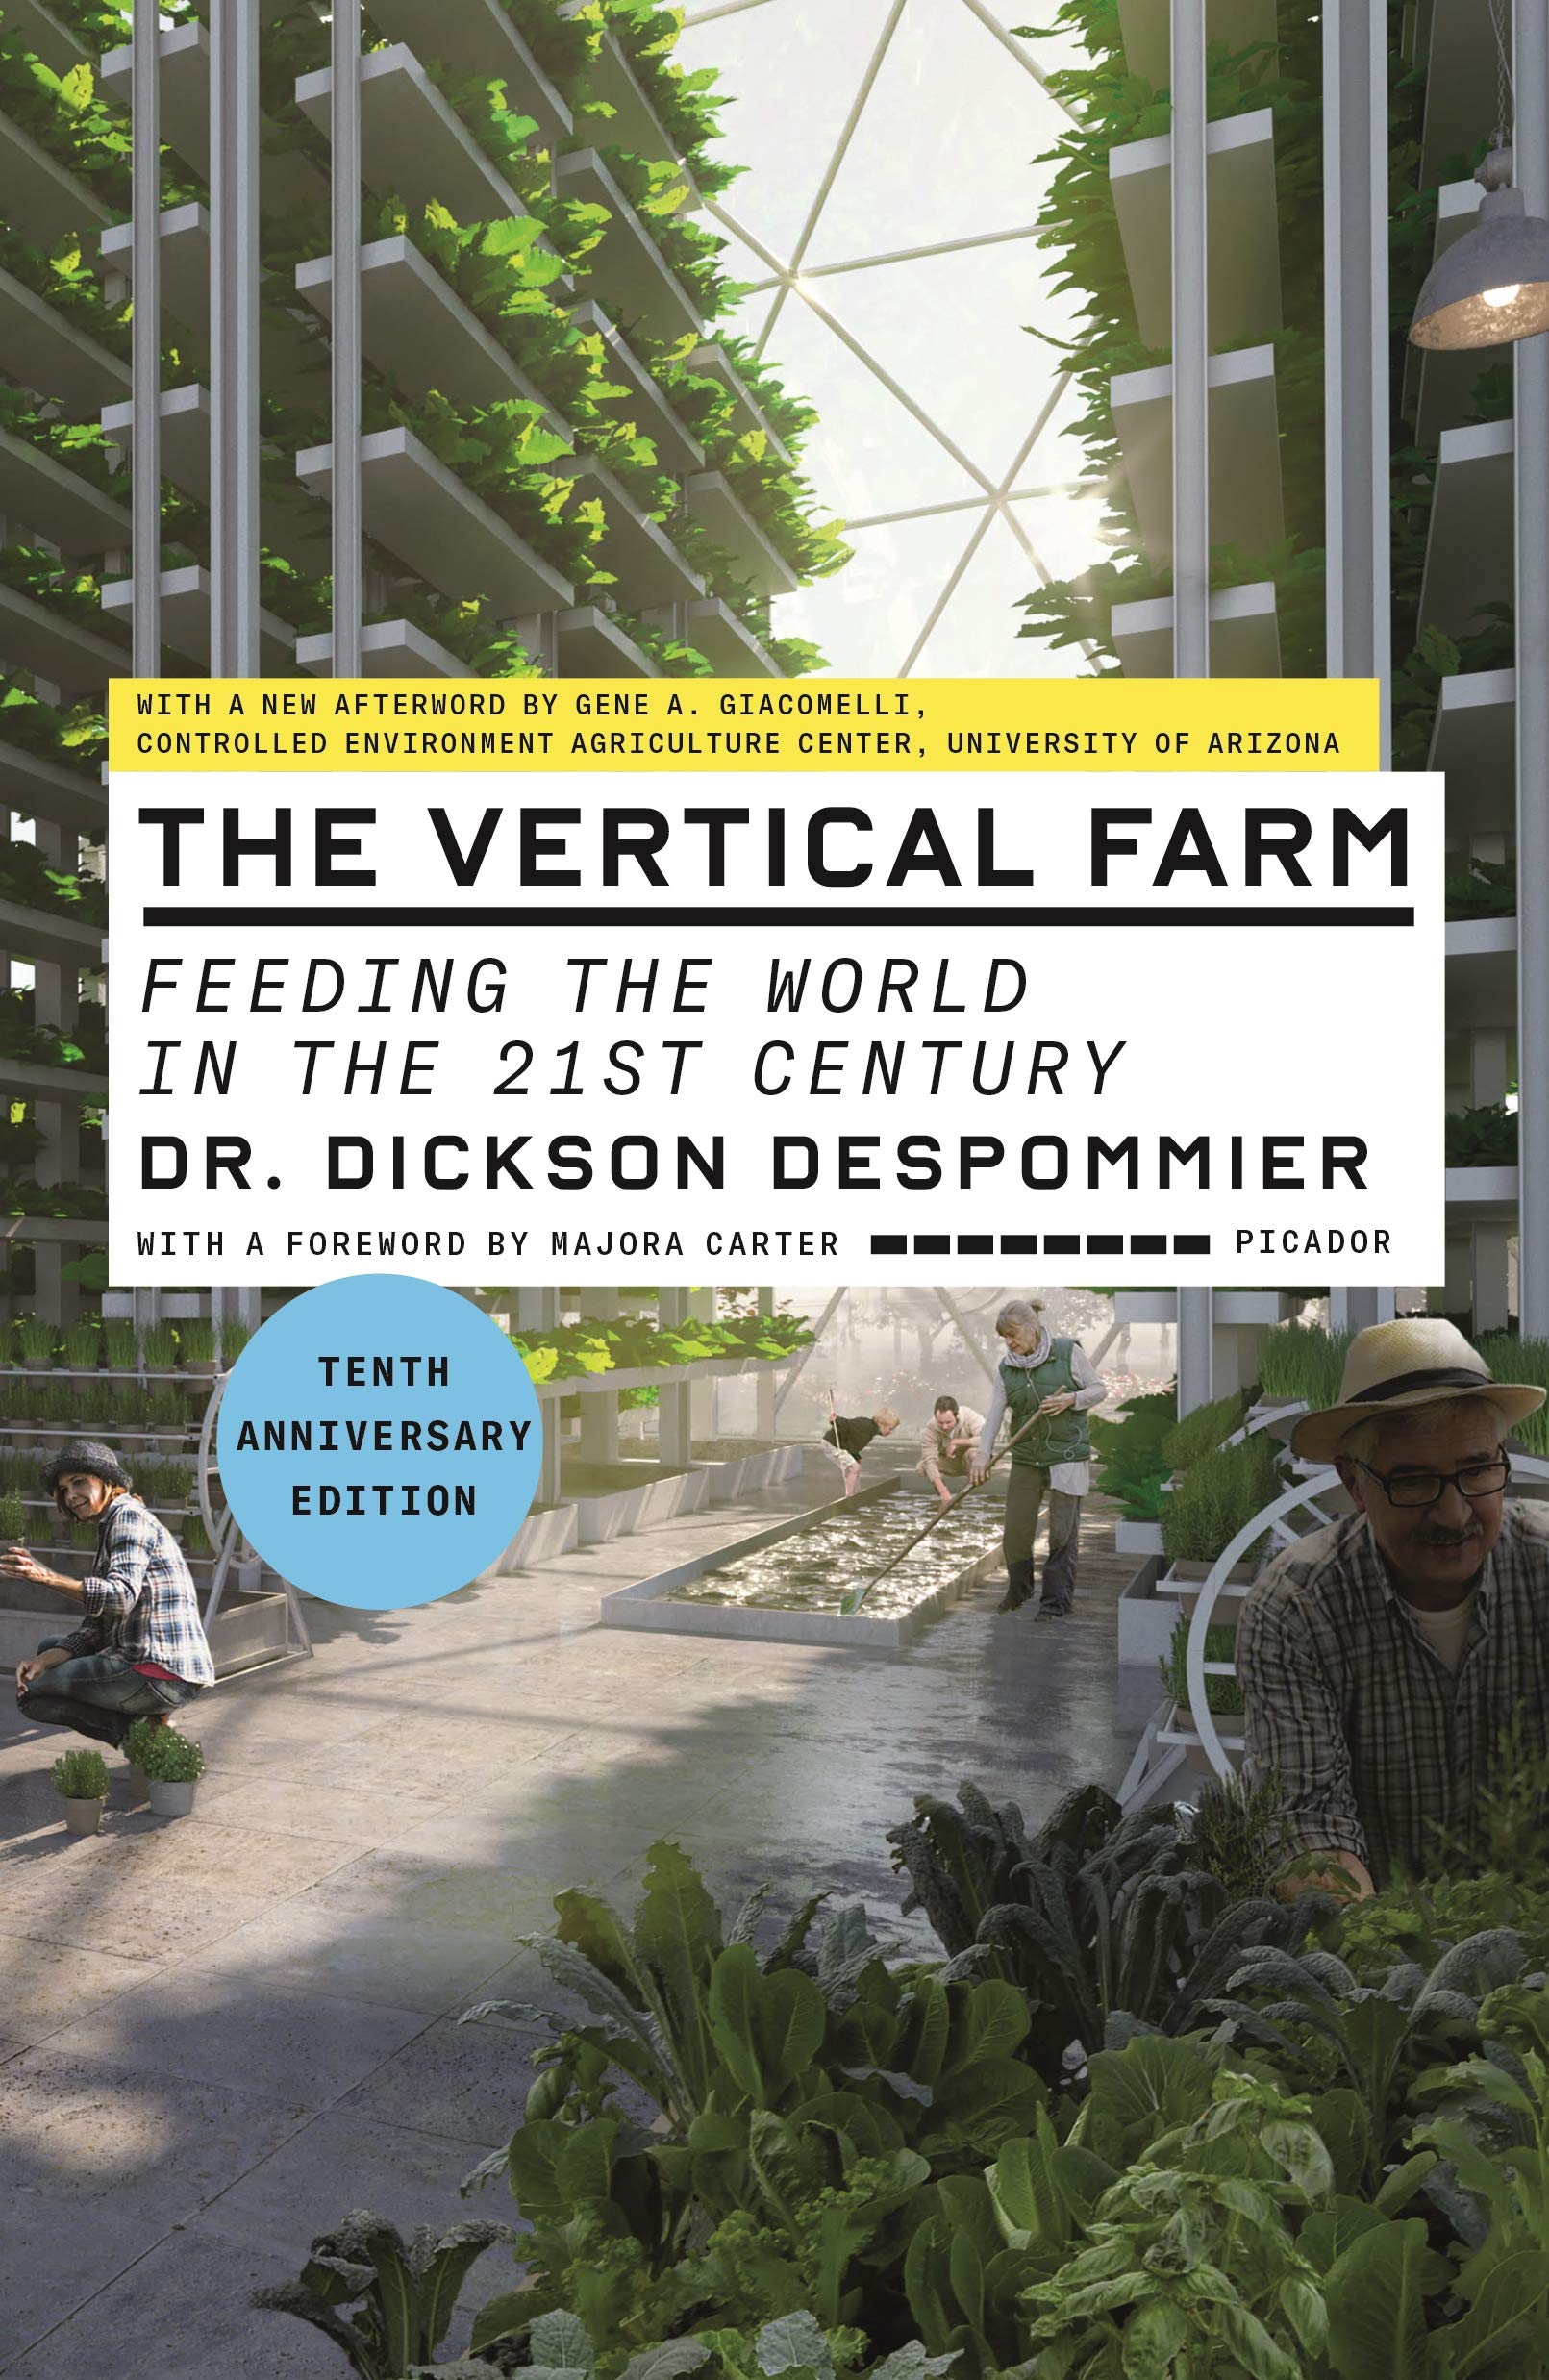 On 10 years of ‘The Vertical Farm’